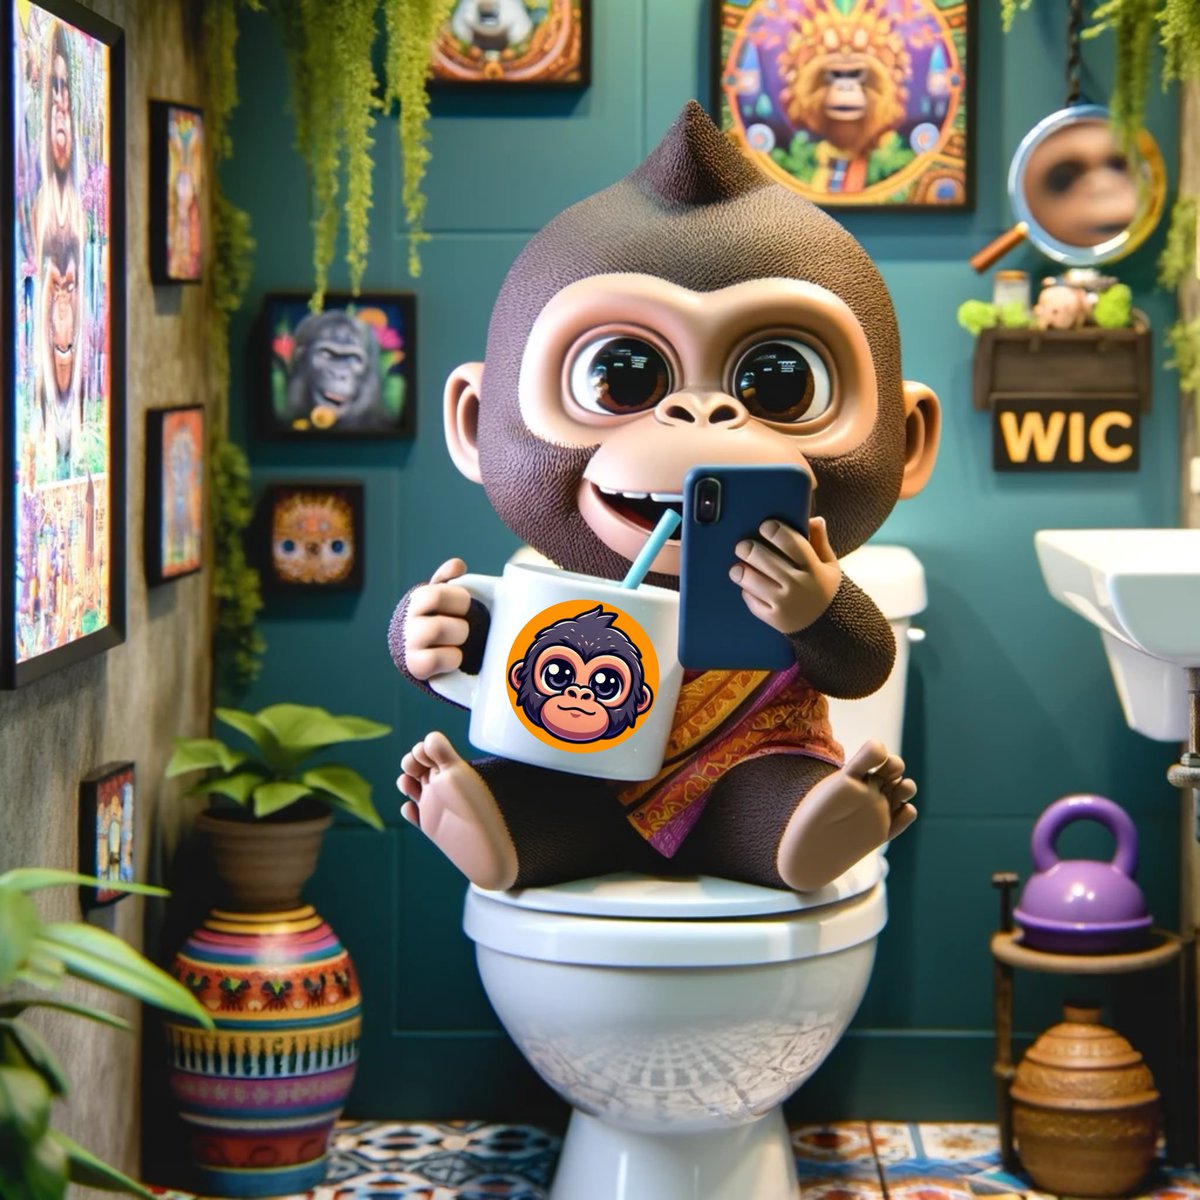 Good Morning 🍌🍌🍌

What’s the first thing you do when you wake up? 🦍

#Coffee
#poo 
#brushyourteeth 

Say GM to Baby Kong 😴😴

#BabyKong #memecoins #cryptomemes #CryptoCommunity #morningvibes #Cryptos #Altcoins #Binance #Bitcoin #SOLANA